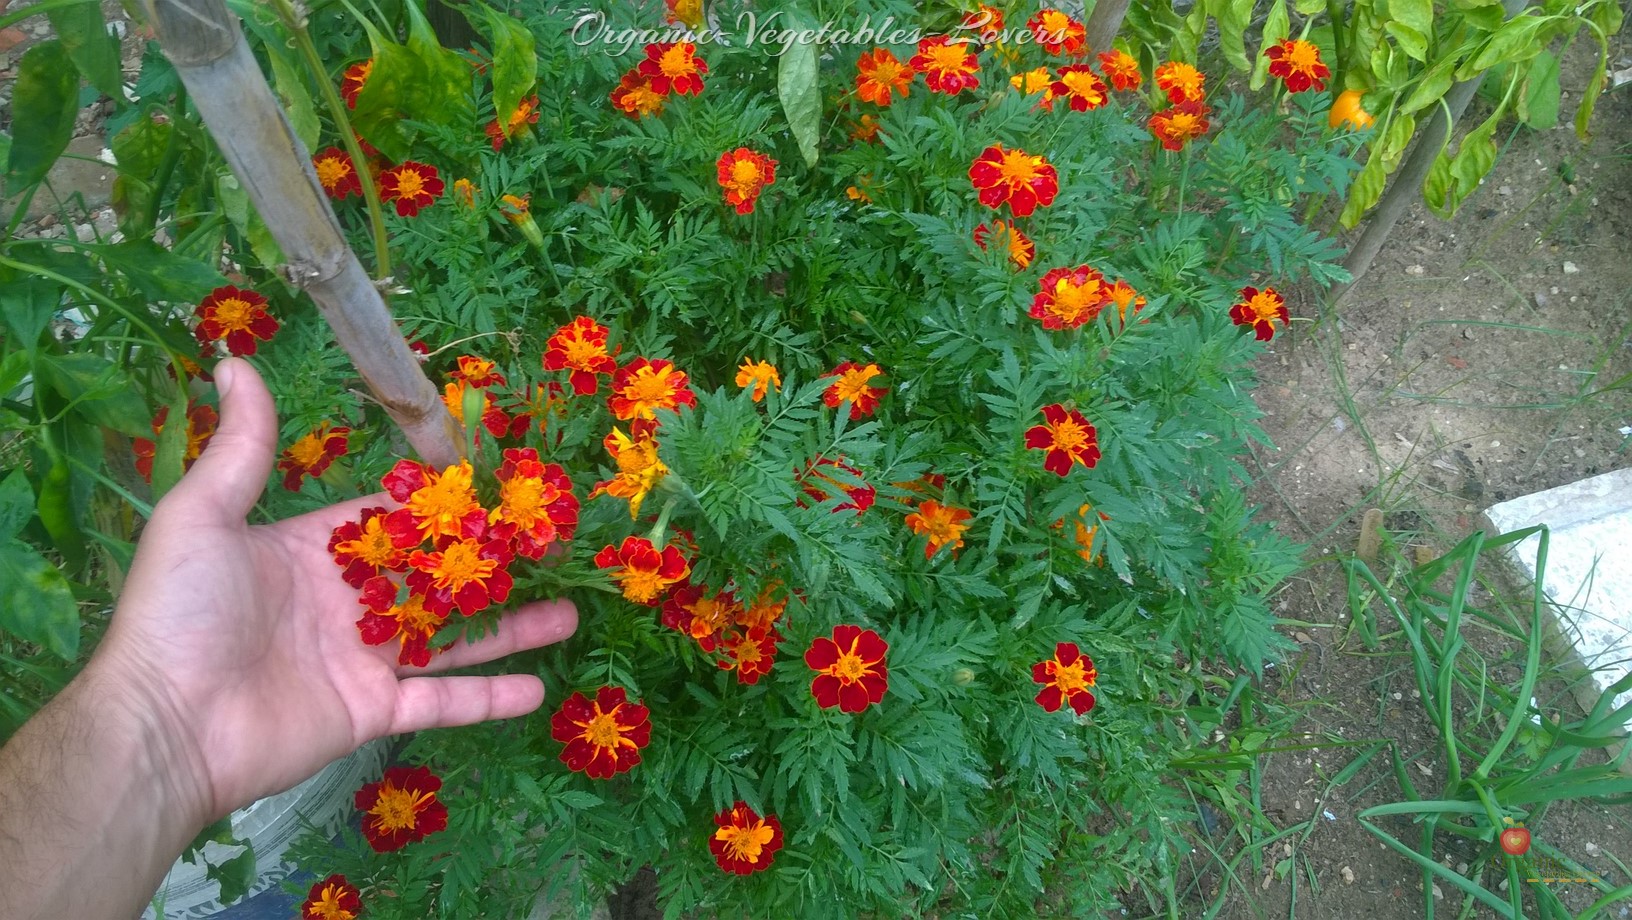 Marigolds provide our gardens cheerful and abundant color all season long and are extremely easy to take care of from seeds. If you learn how to harvest and save their seeds, you won't have to buy new plants or seeds for the next growing season